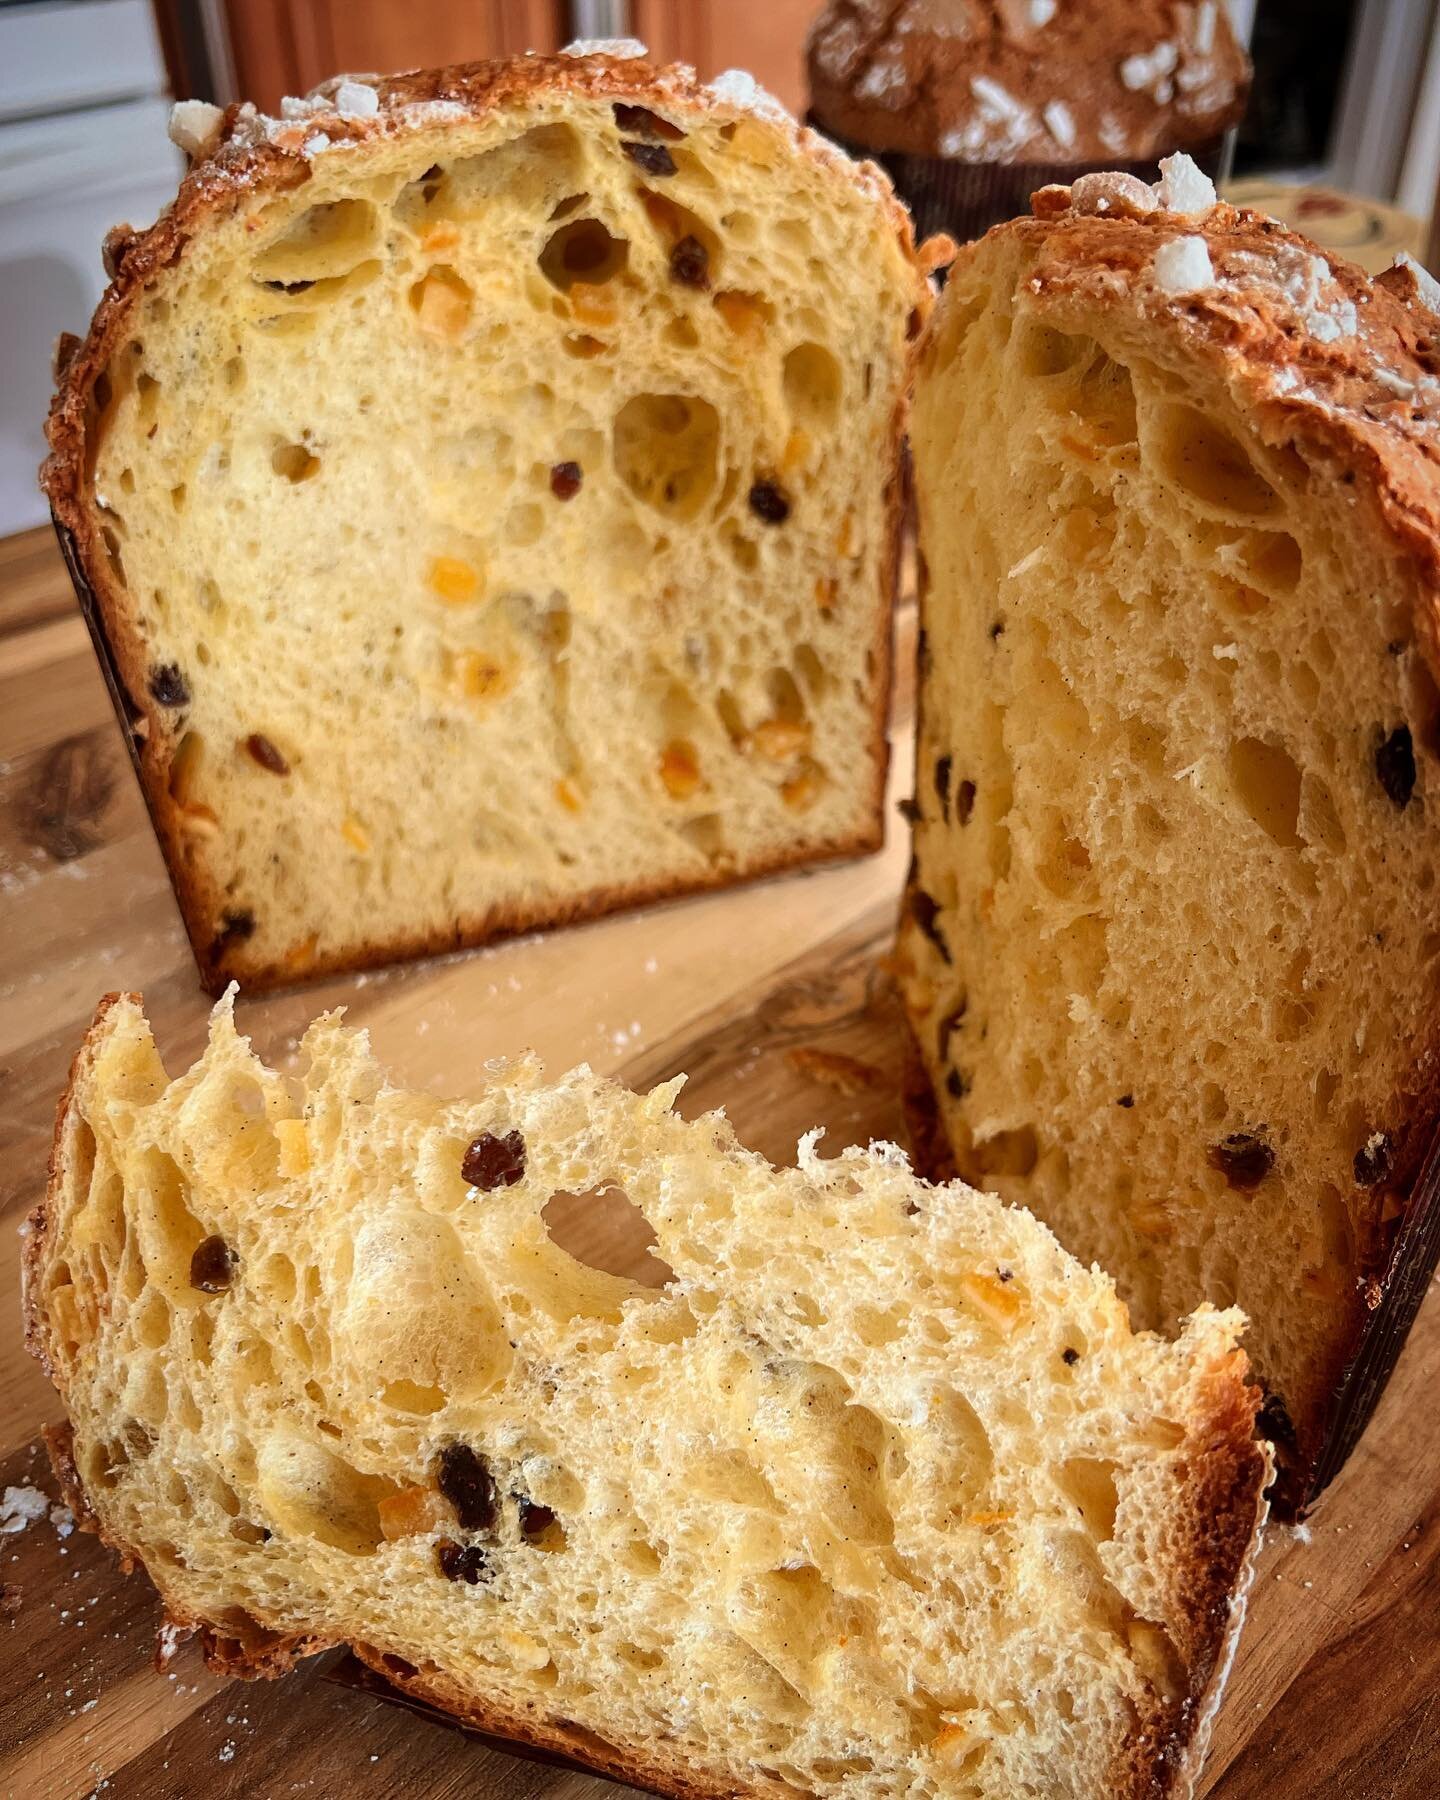 Getting ready for the holiday season!  Throughout the year, I bake small batches of this ethereal Christmas bread to learn intricacies of its production- all leading up to the holiday season. This year, I will be making 2 flavors of panettone: Classi